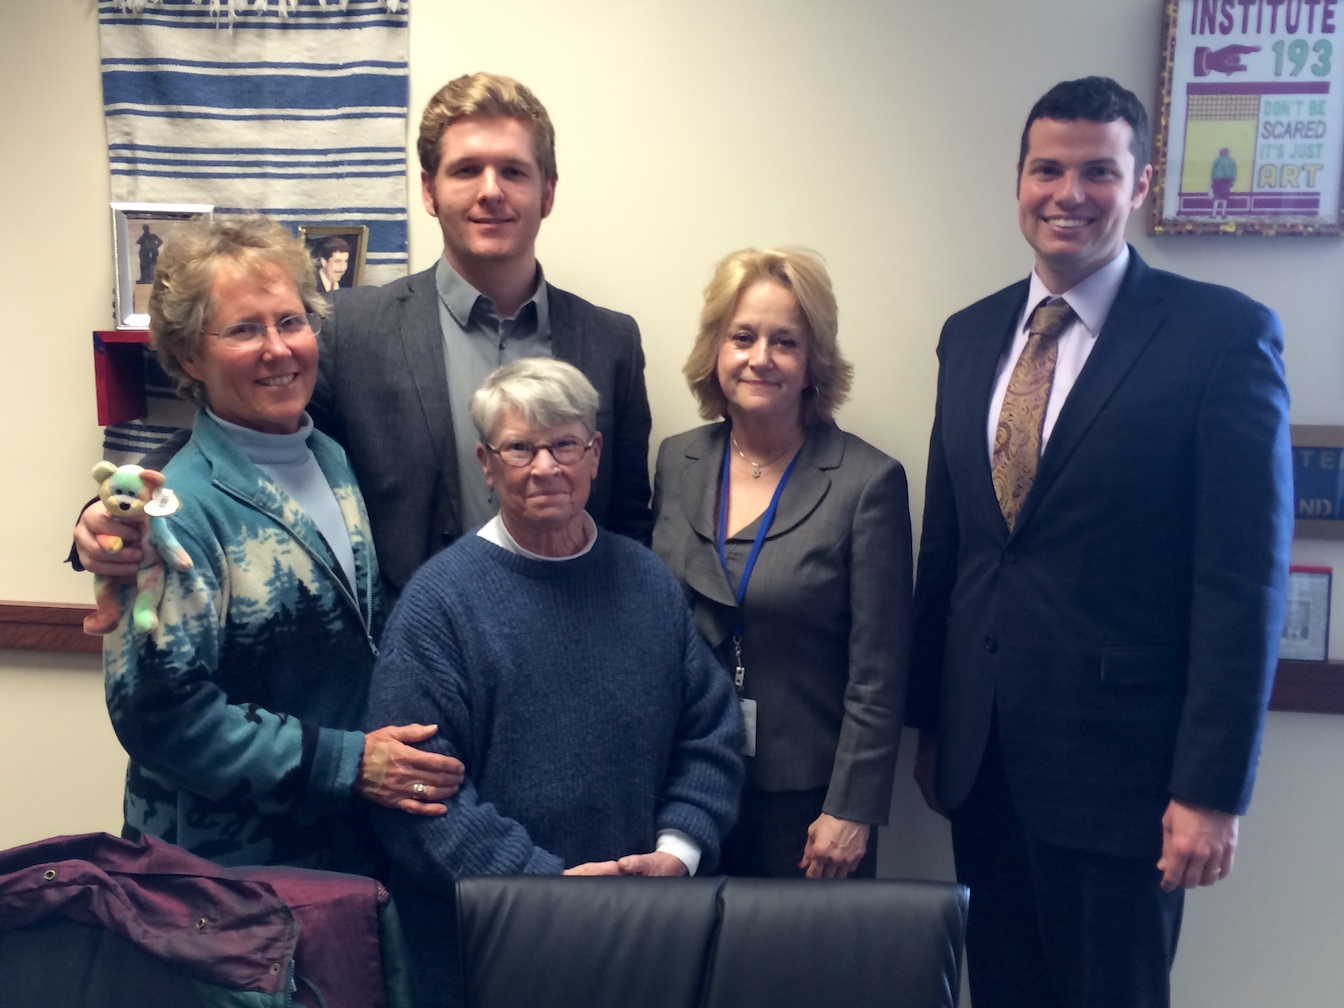 Joan Callahan (Jennifer’s wife) legally adopts David Crossen as her son, Lexington, KY, February 2014. Pictured here are Joan Callahan, David Crossen, Jennifer Crossen, KAthy Stein, and Ross Ewing, the pro-bono lawyer who wanted to take their case to the Supreme Court.